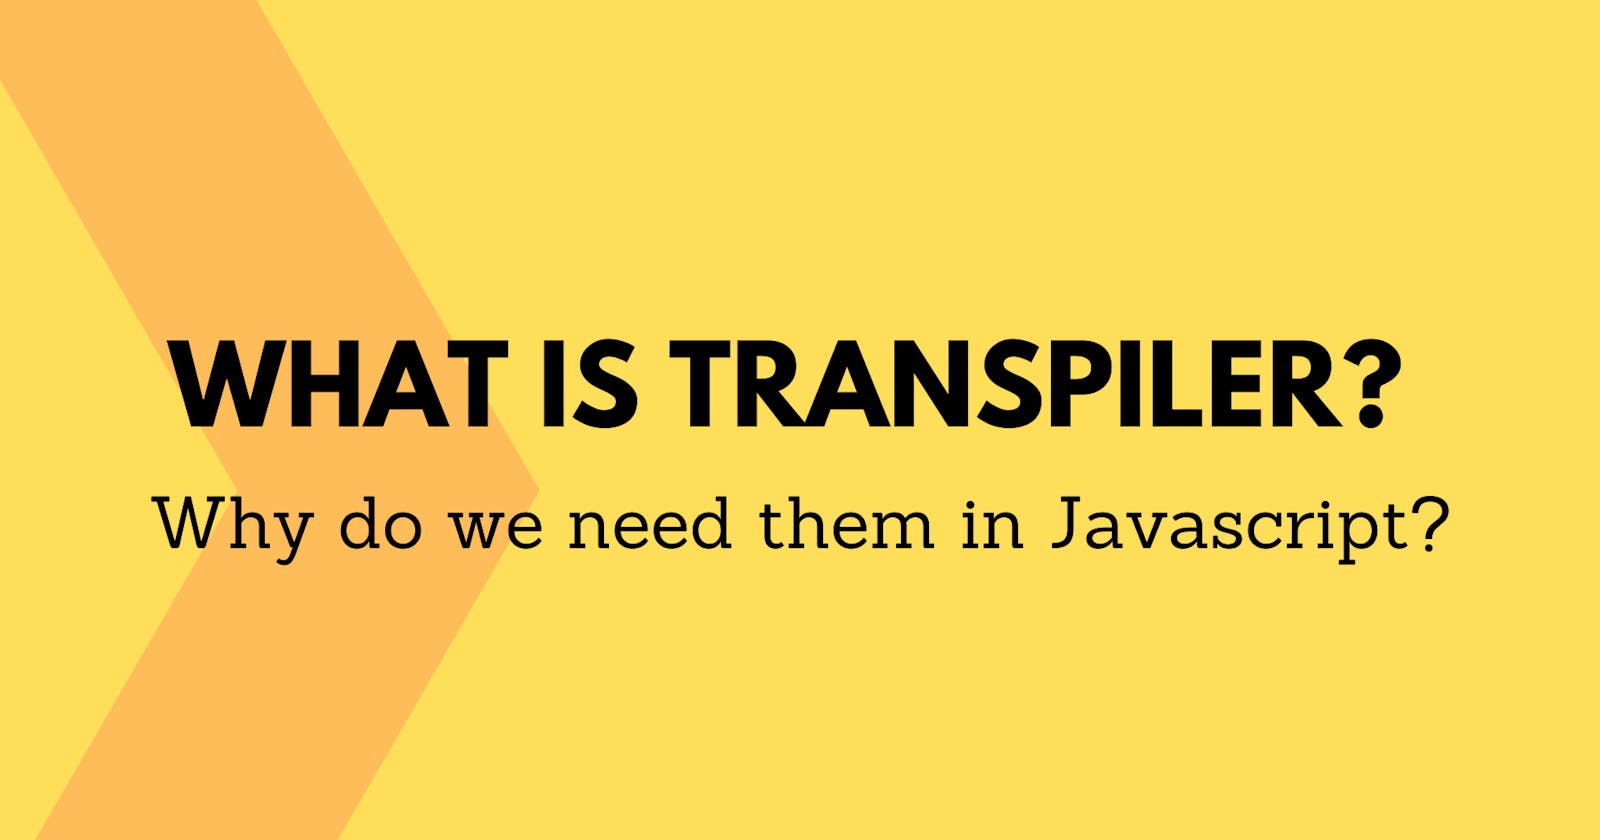 What is Transpiler? Why do we need them in Javascript